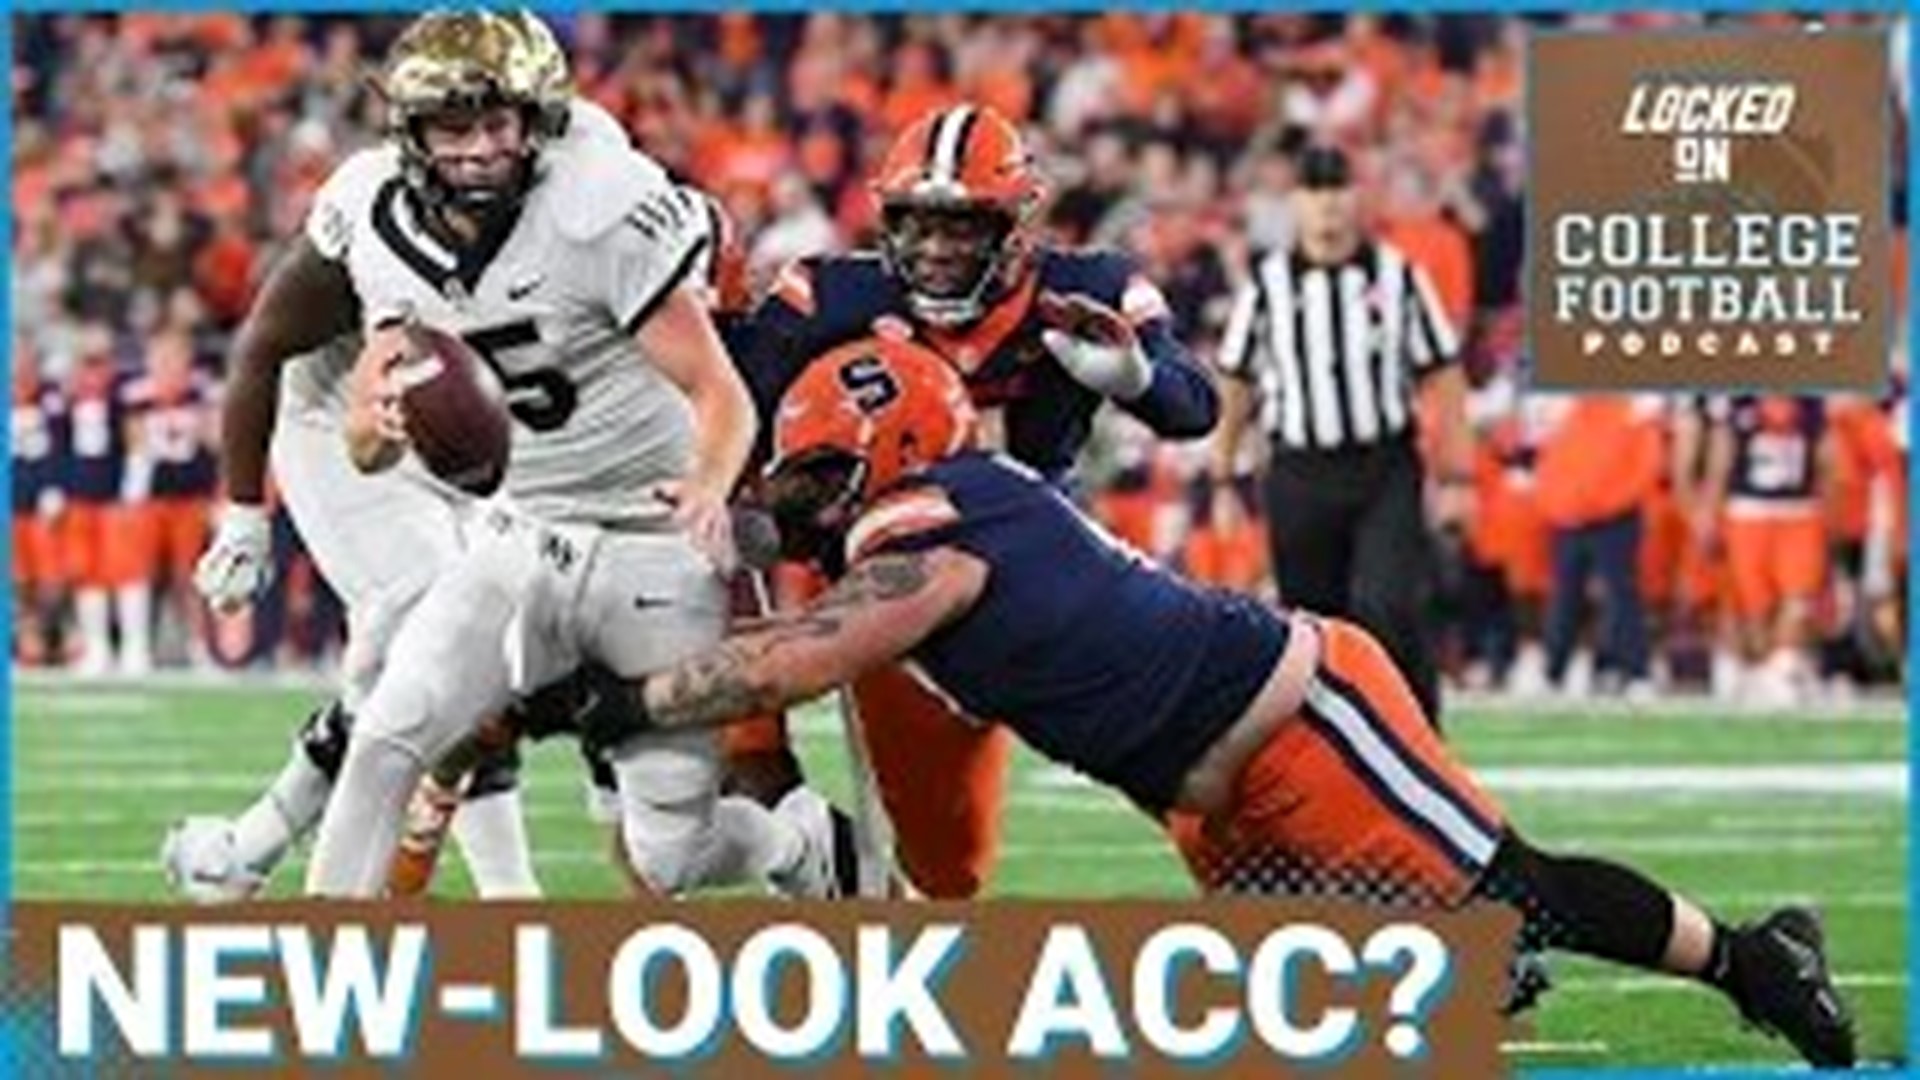 The ACC's future is murky at best if Florida State and Clemson are successful in leaving the league for the Big 10 or SEC.